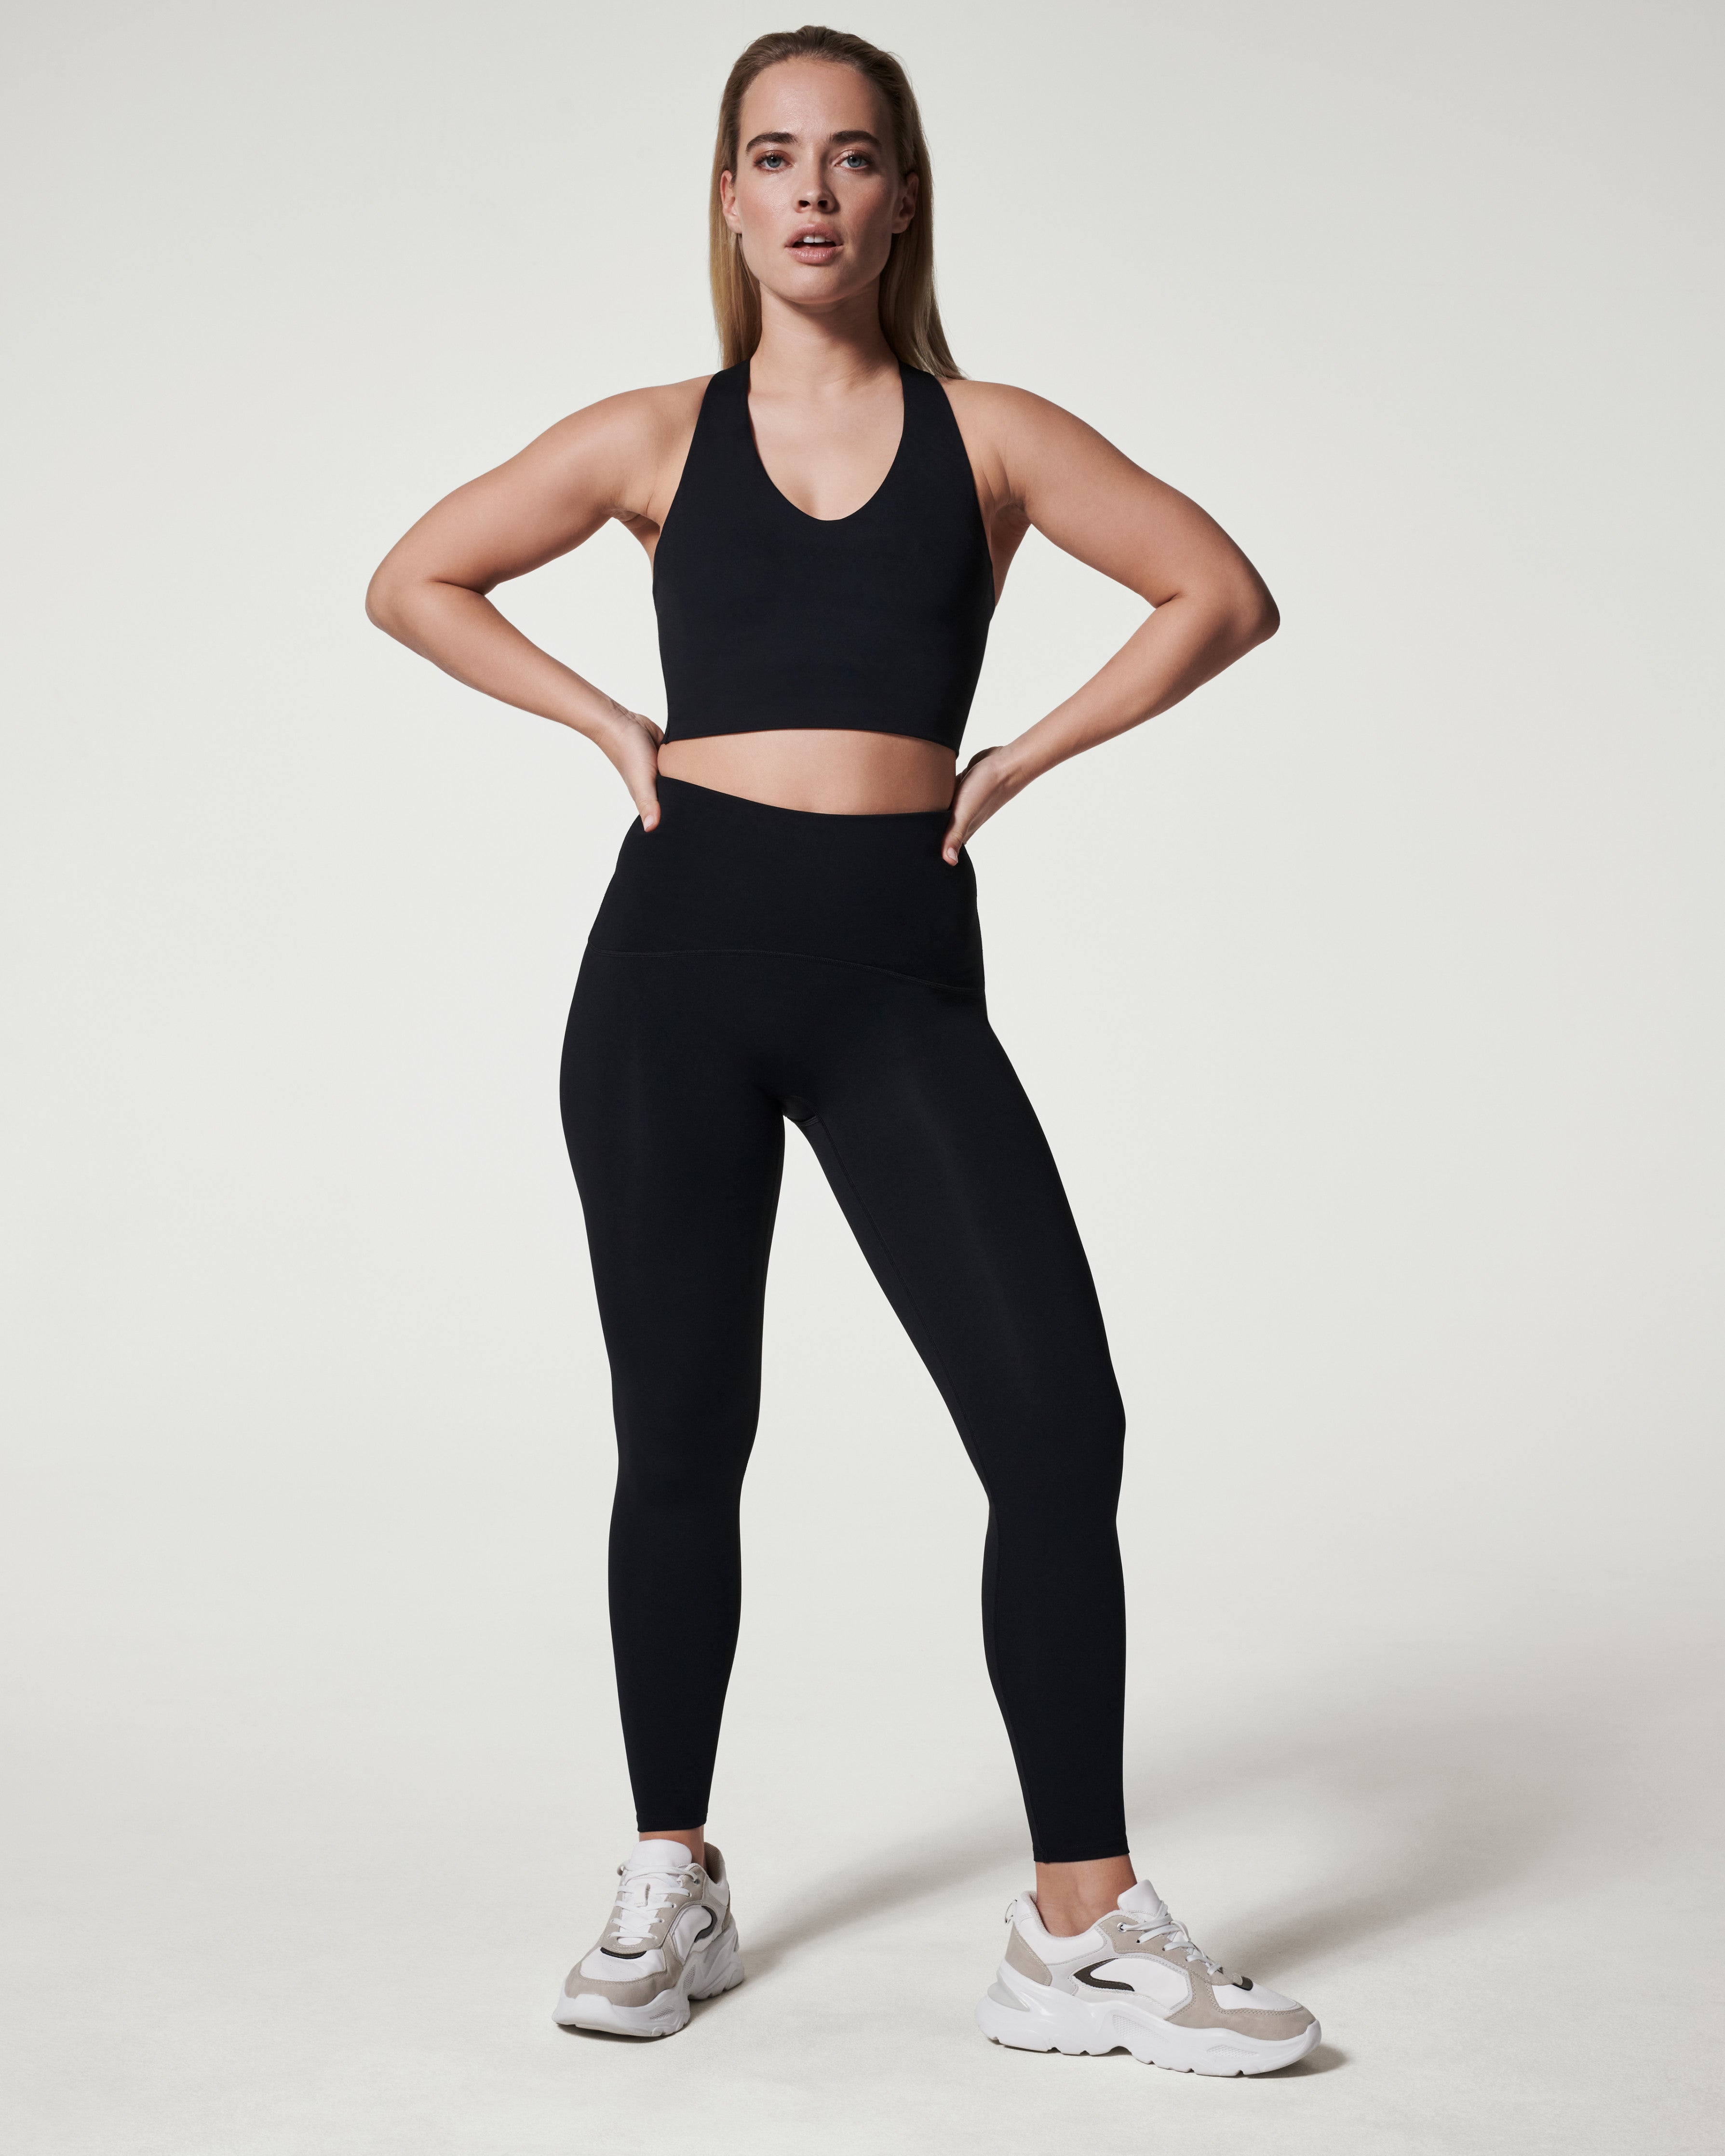 Booty Boost Leggings  The leggings known for giving you the BEST